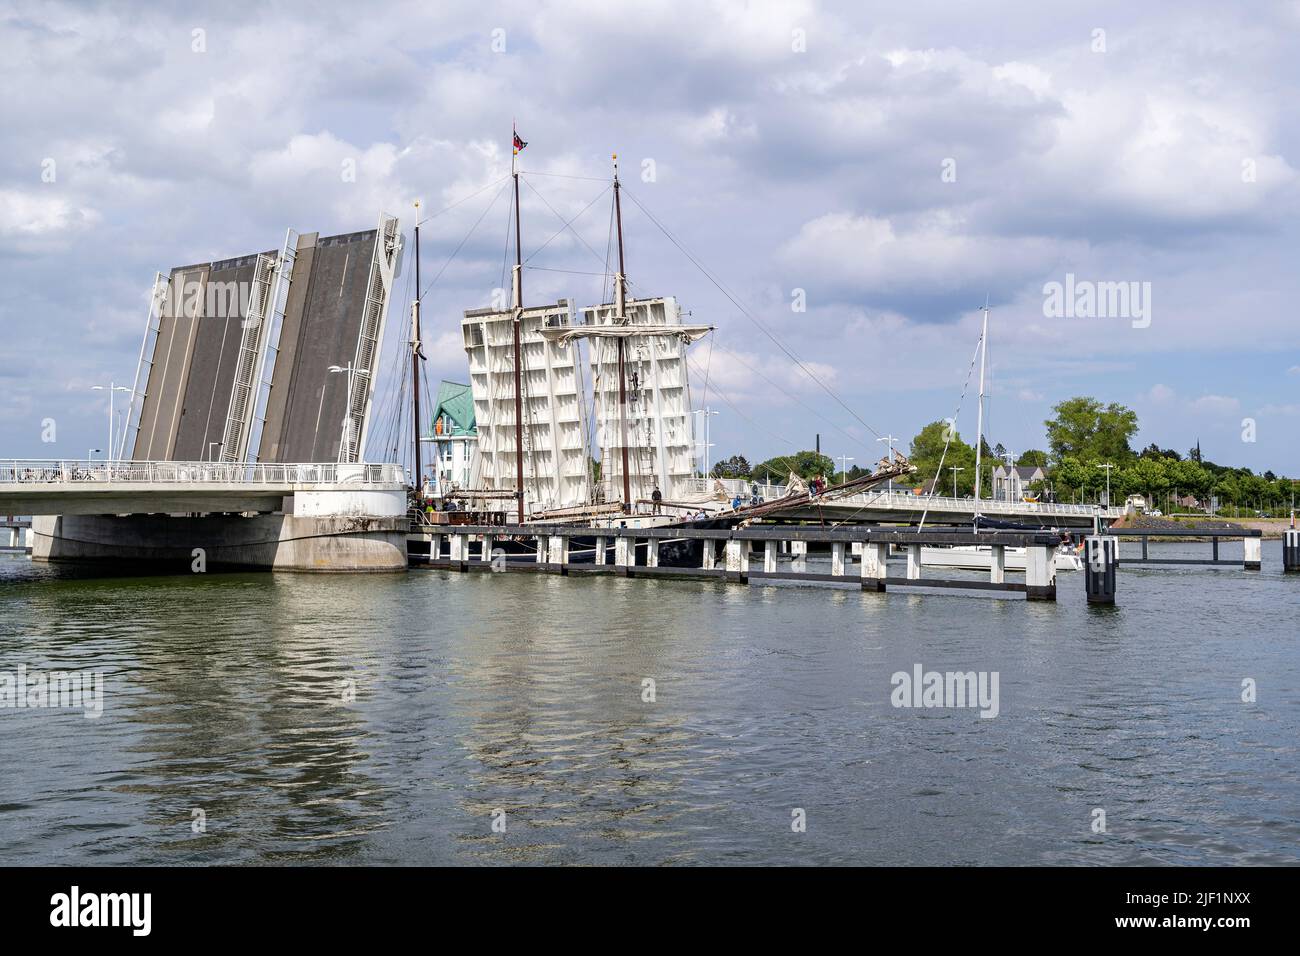 opened bascule bridge over the river Schlei in Kappeln, Germany Stock Photo